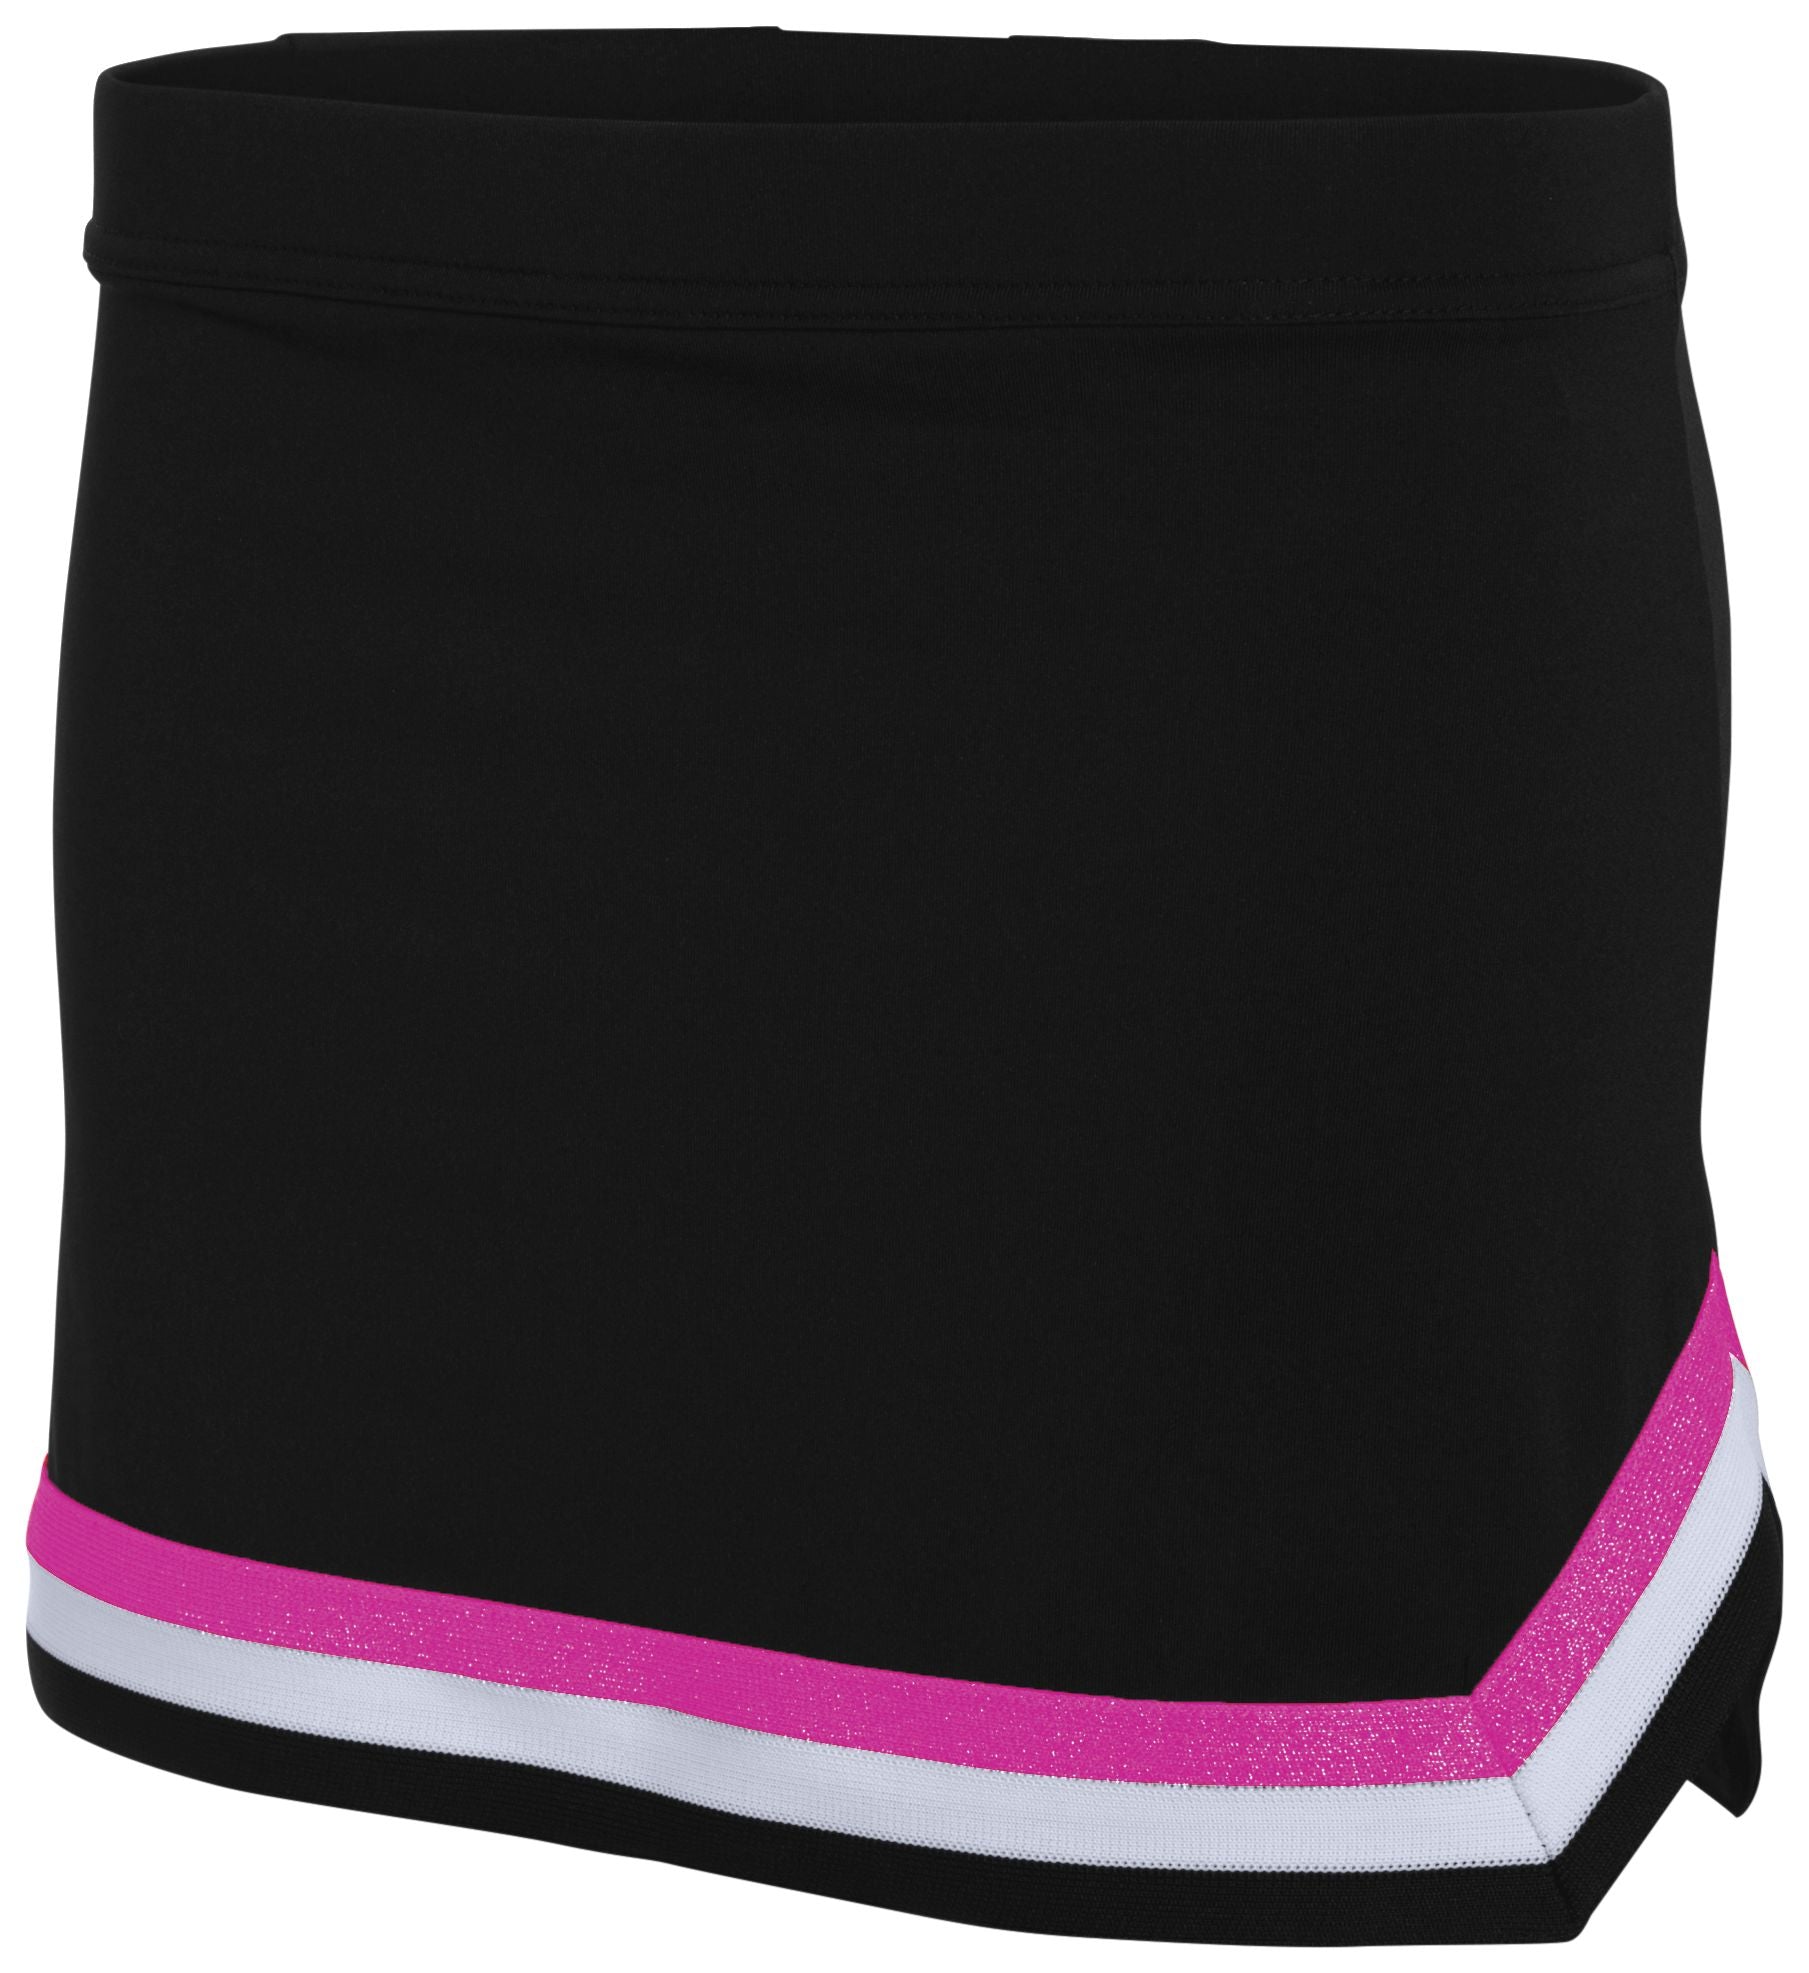 Augusta Sportswear Girls Pike Skirt in Black/White/Power Pink  -Part of the Girls, Augusta-Products, Cheer product lines at KanaleyCreations.com